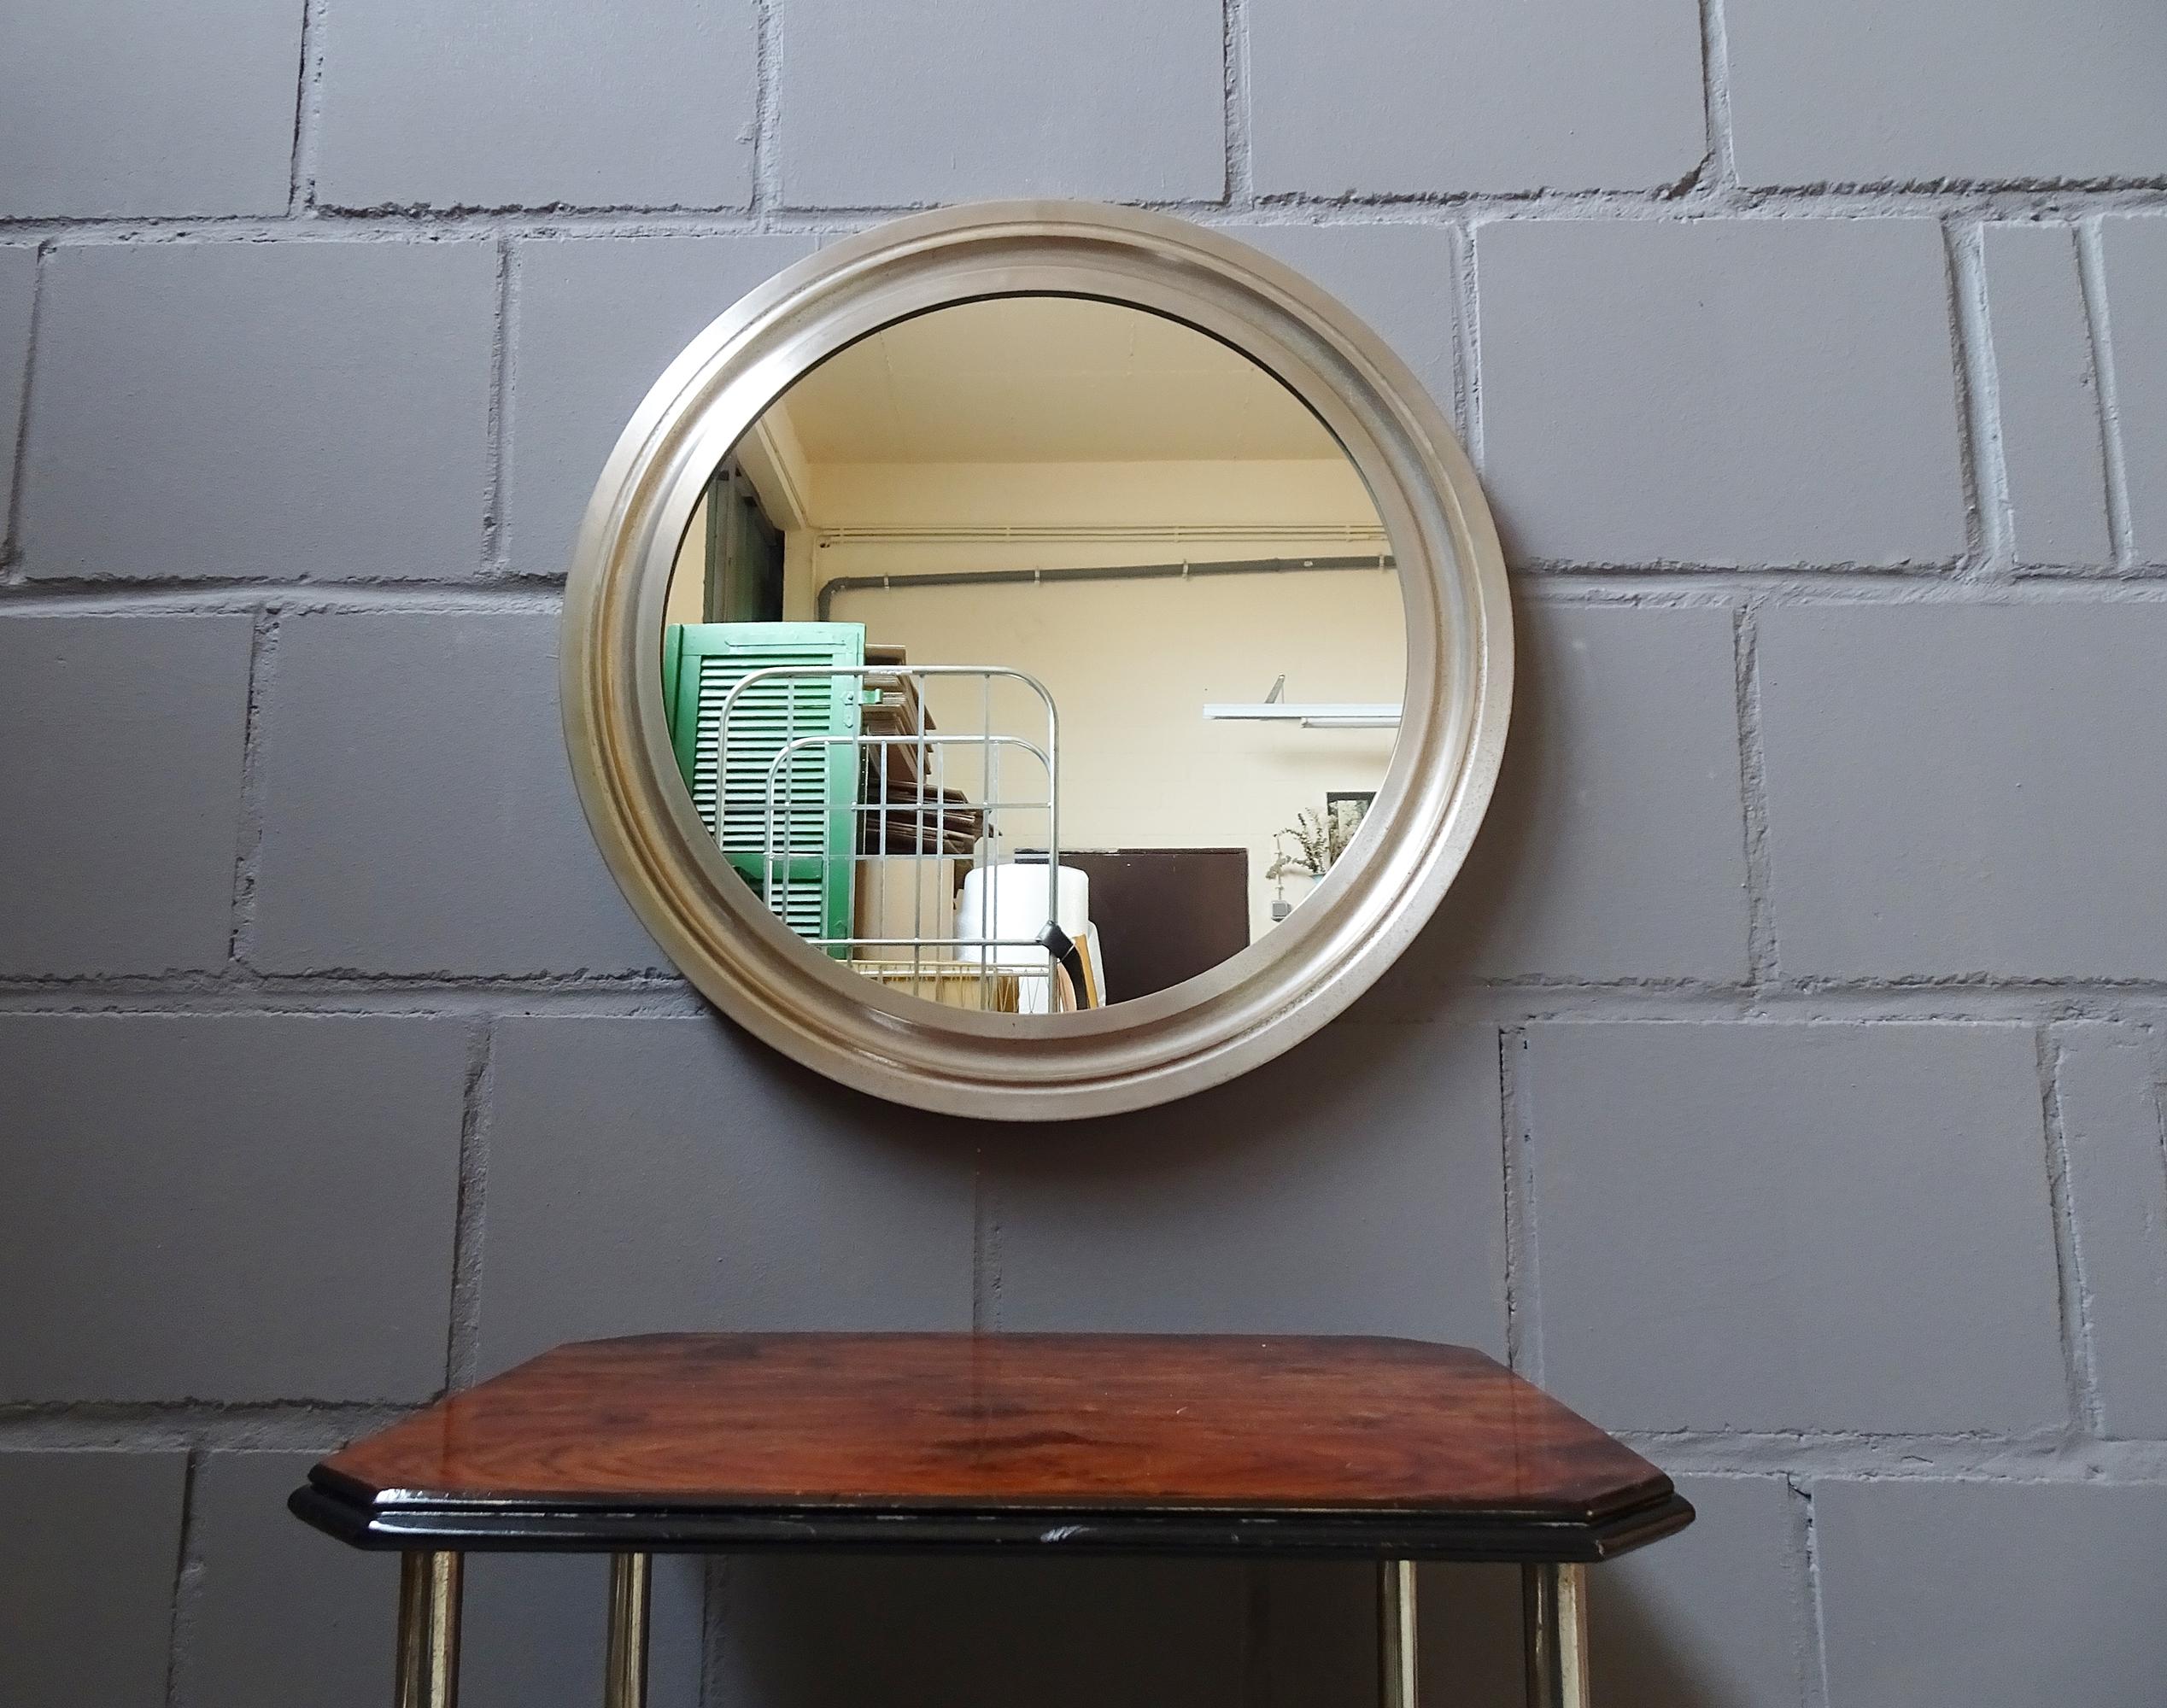 Modern Italian wall mirror, from the 1960s by Sergio Mazza for Artemide. The frame made of nickel-plated brass and its even patina gives it a timeless design. With a diameter of almost 60 cm, it is a great accent mirror.

Italian midcentury design.